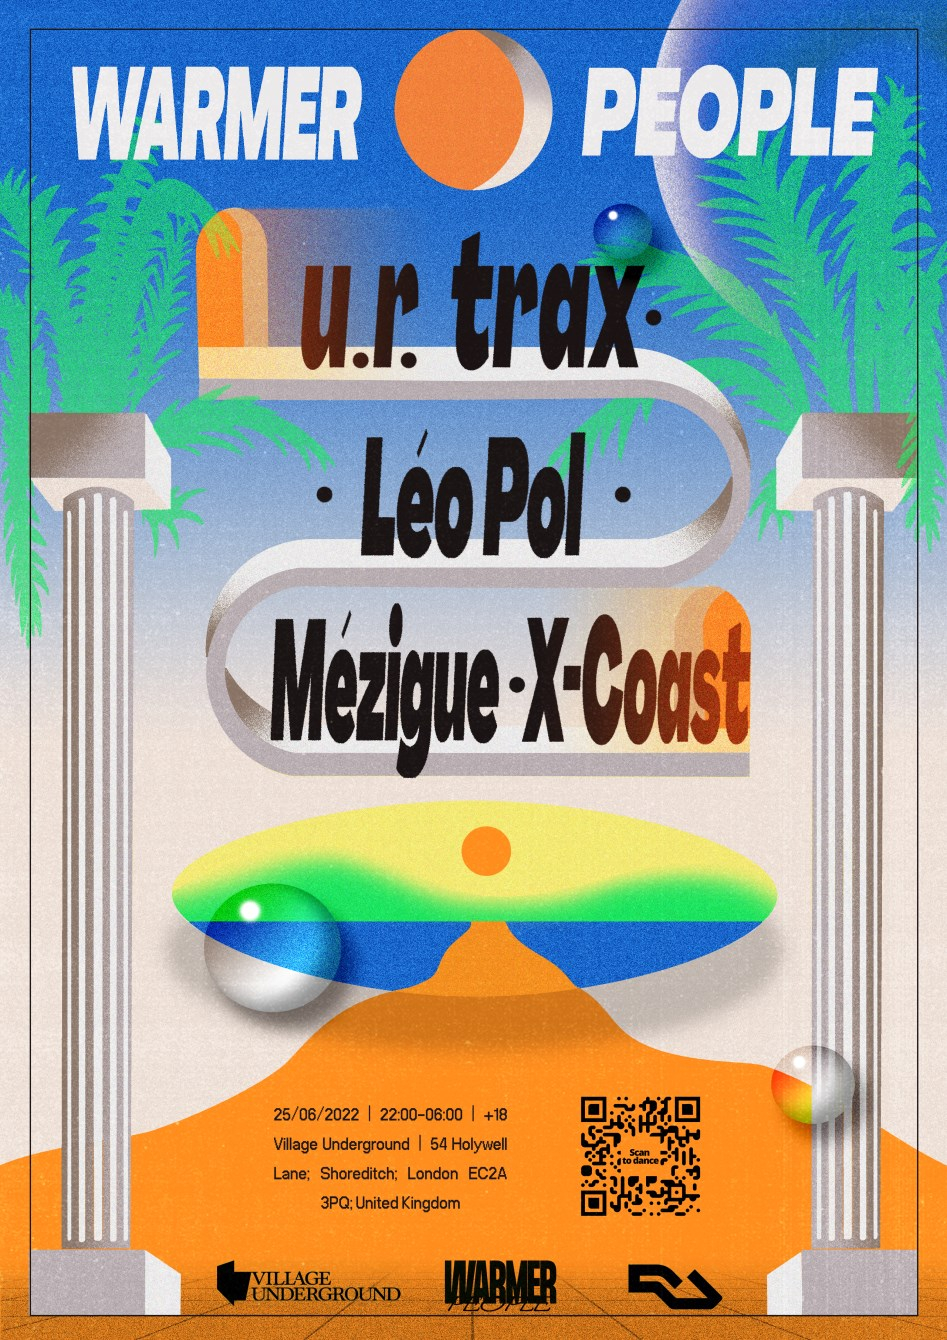 [SOLD OUT] Warmer People: Leo Pol (live), X-Coast, u.r.trax & Mézigue 🌴 - Flyer front